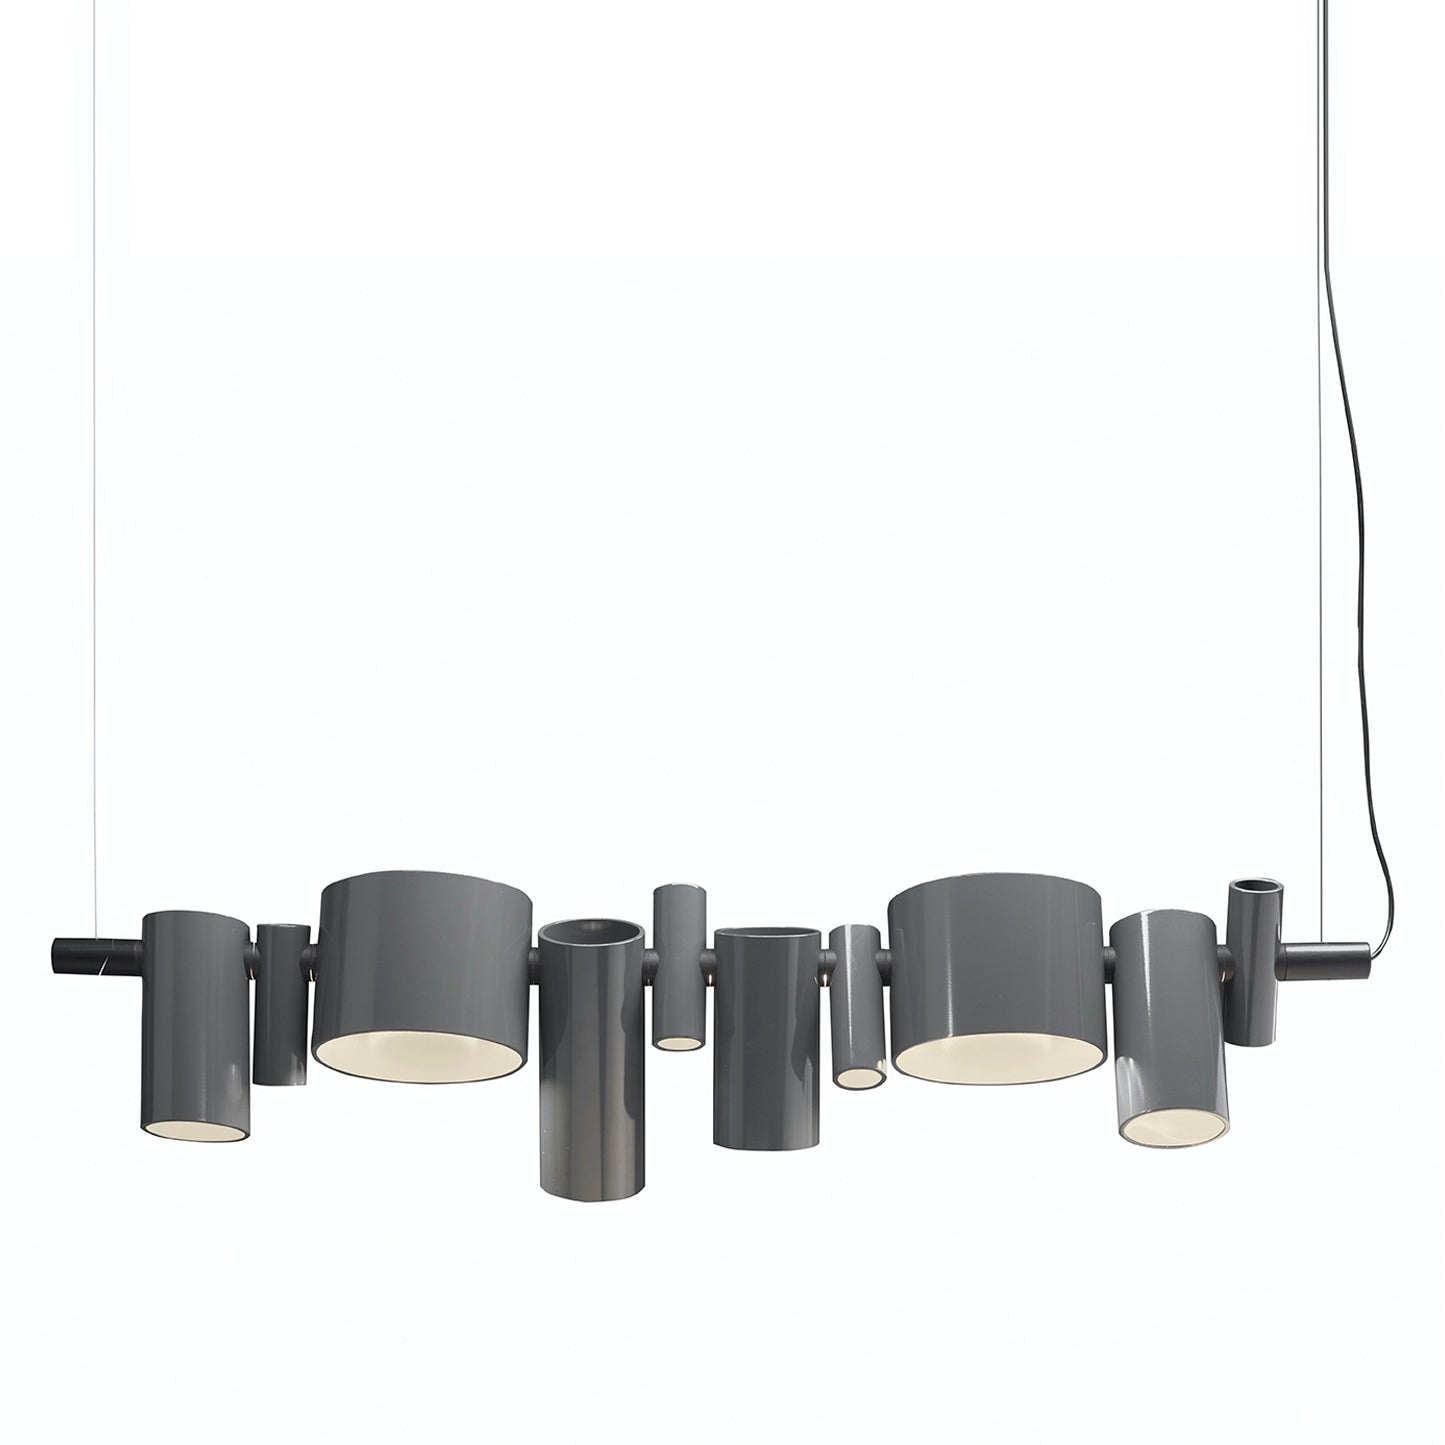 Dancing Queen Suspension Light: Lacquered Grey